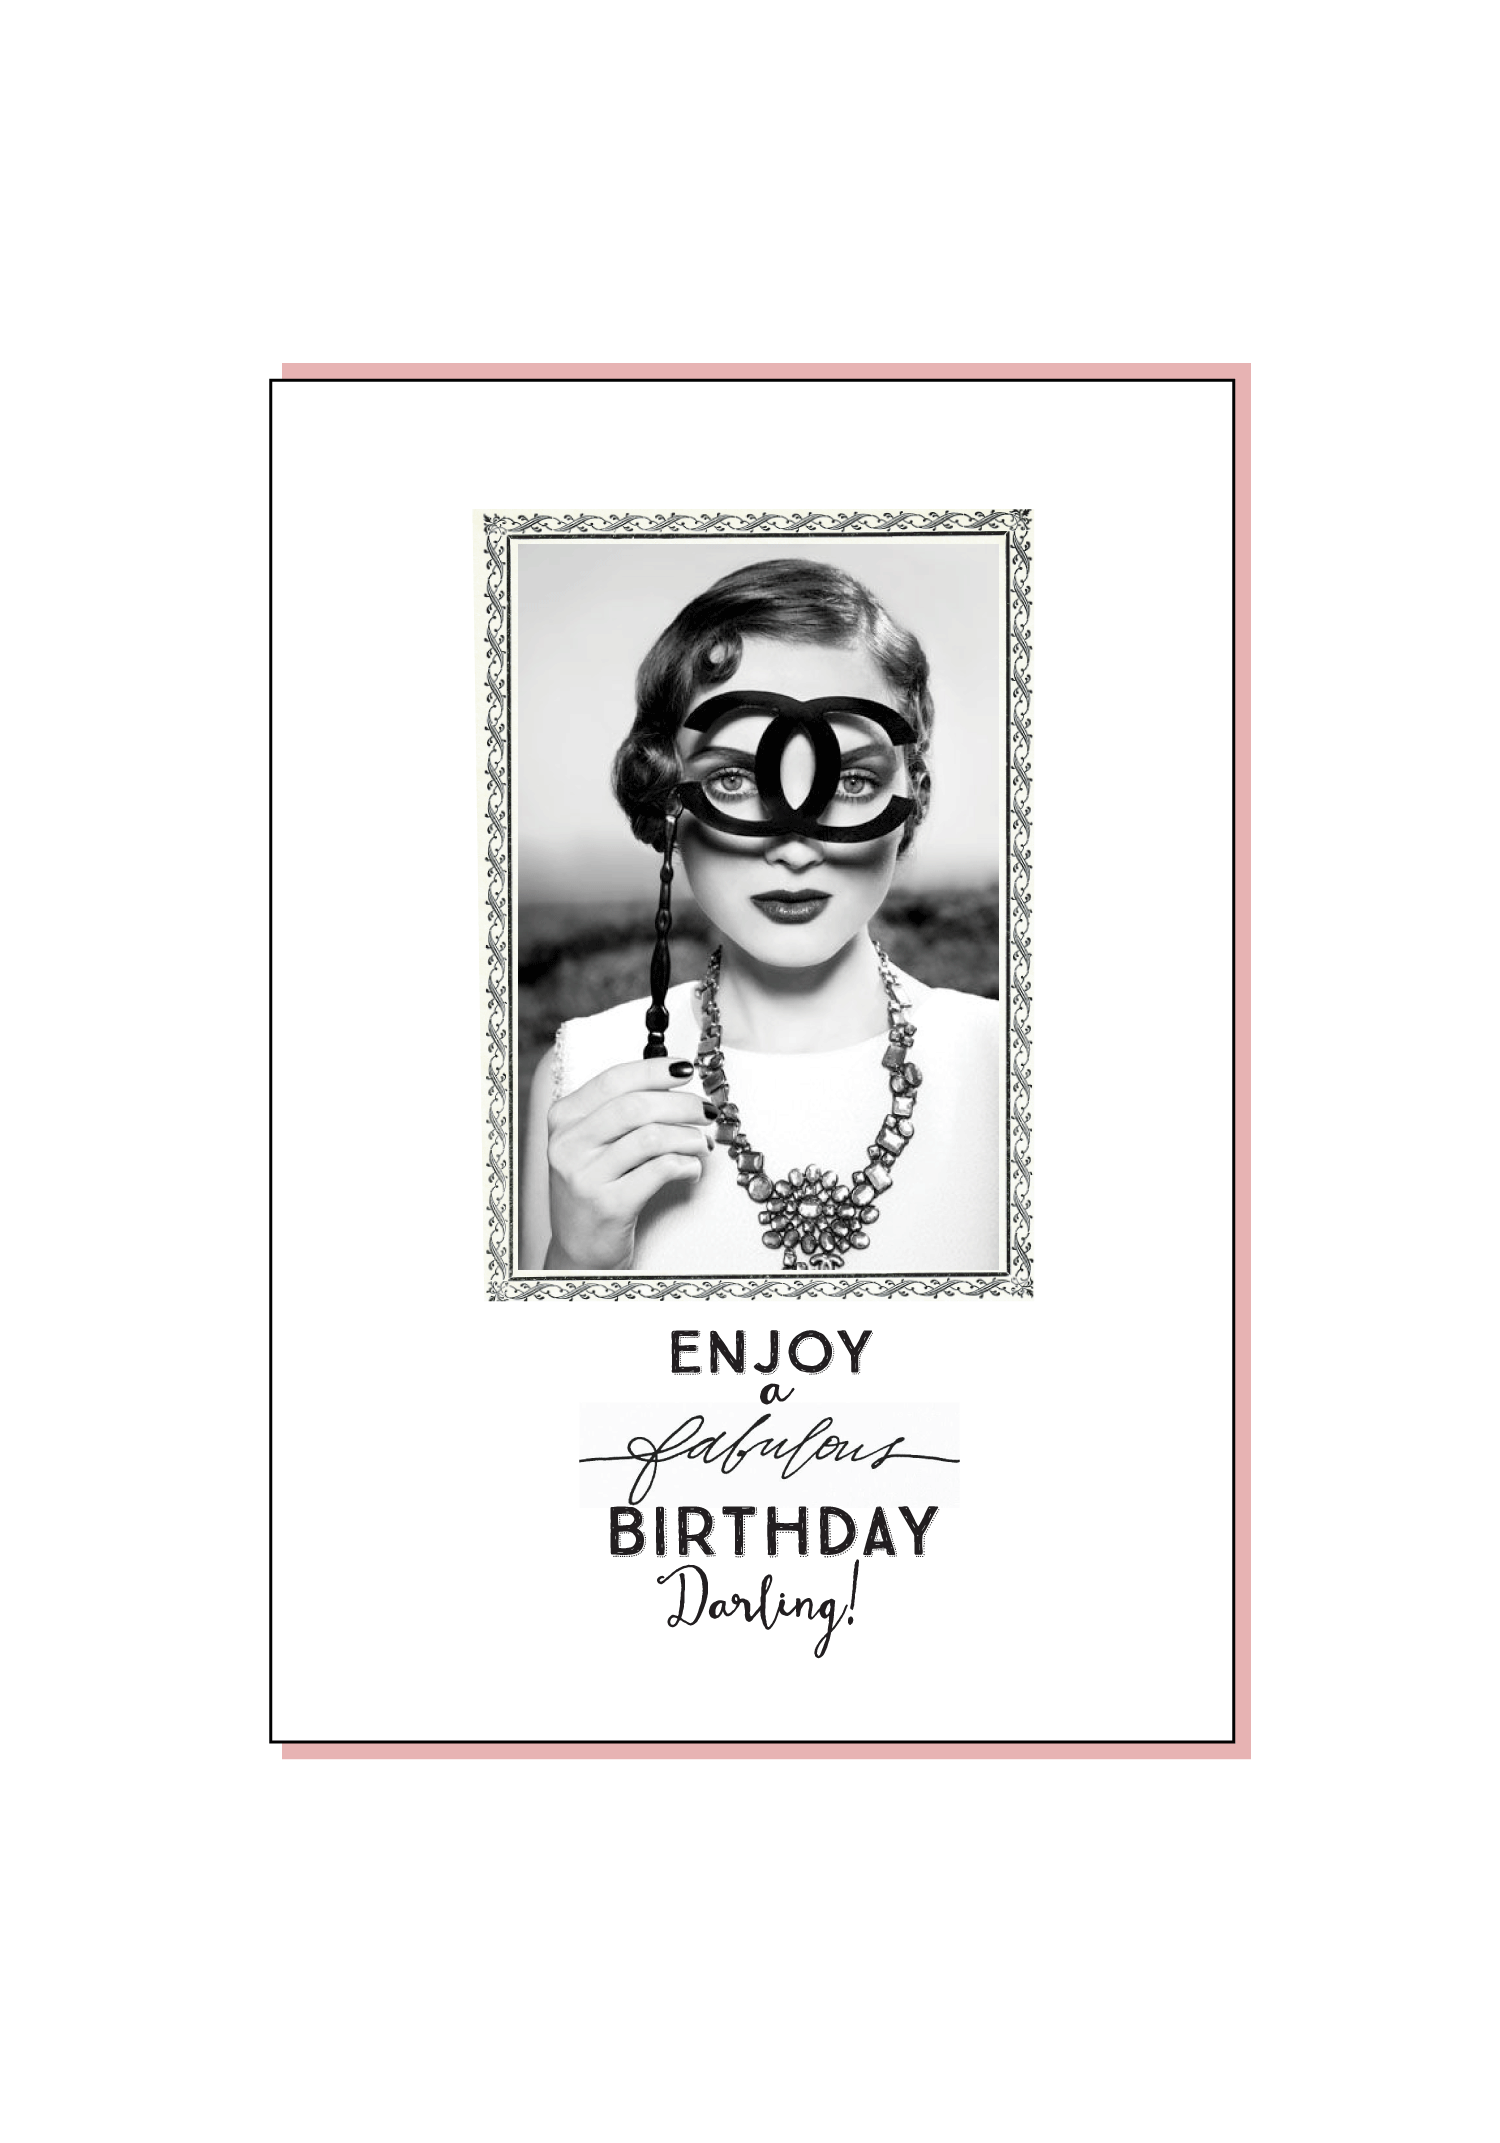 Chanel Glasses Birthday Card — Social Butterfly Designs